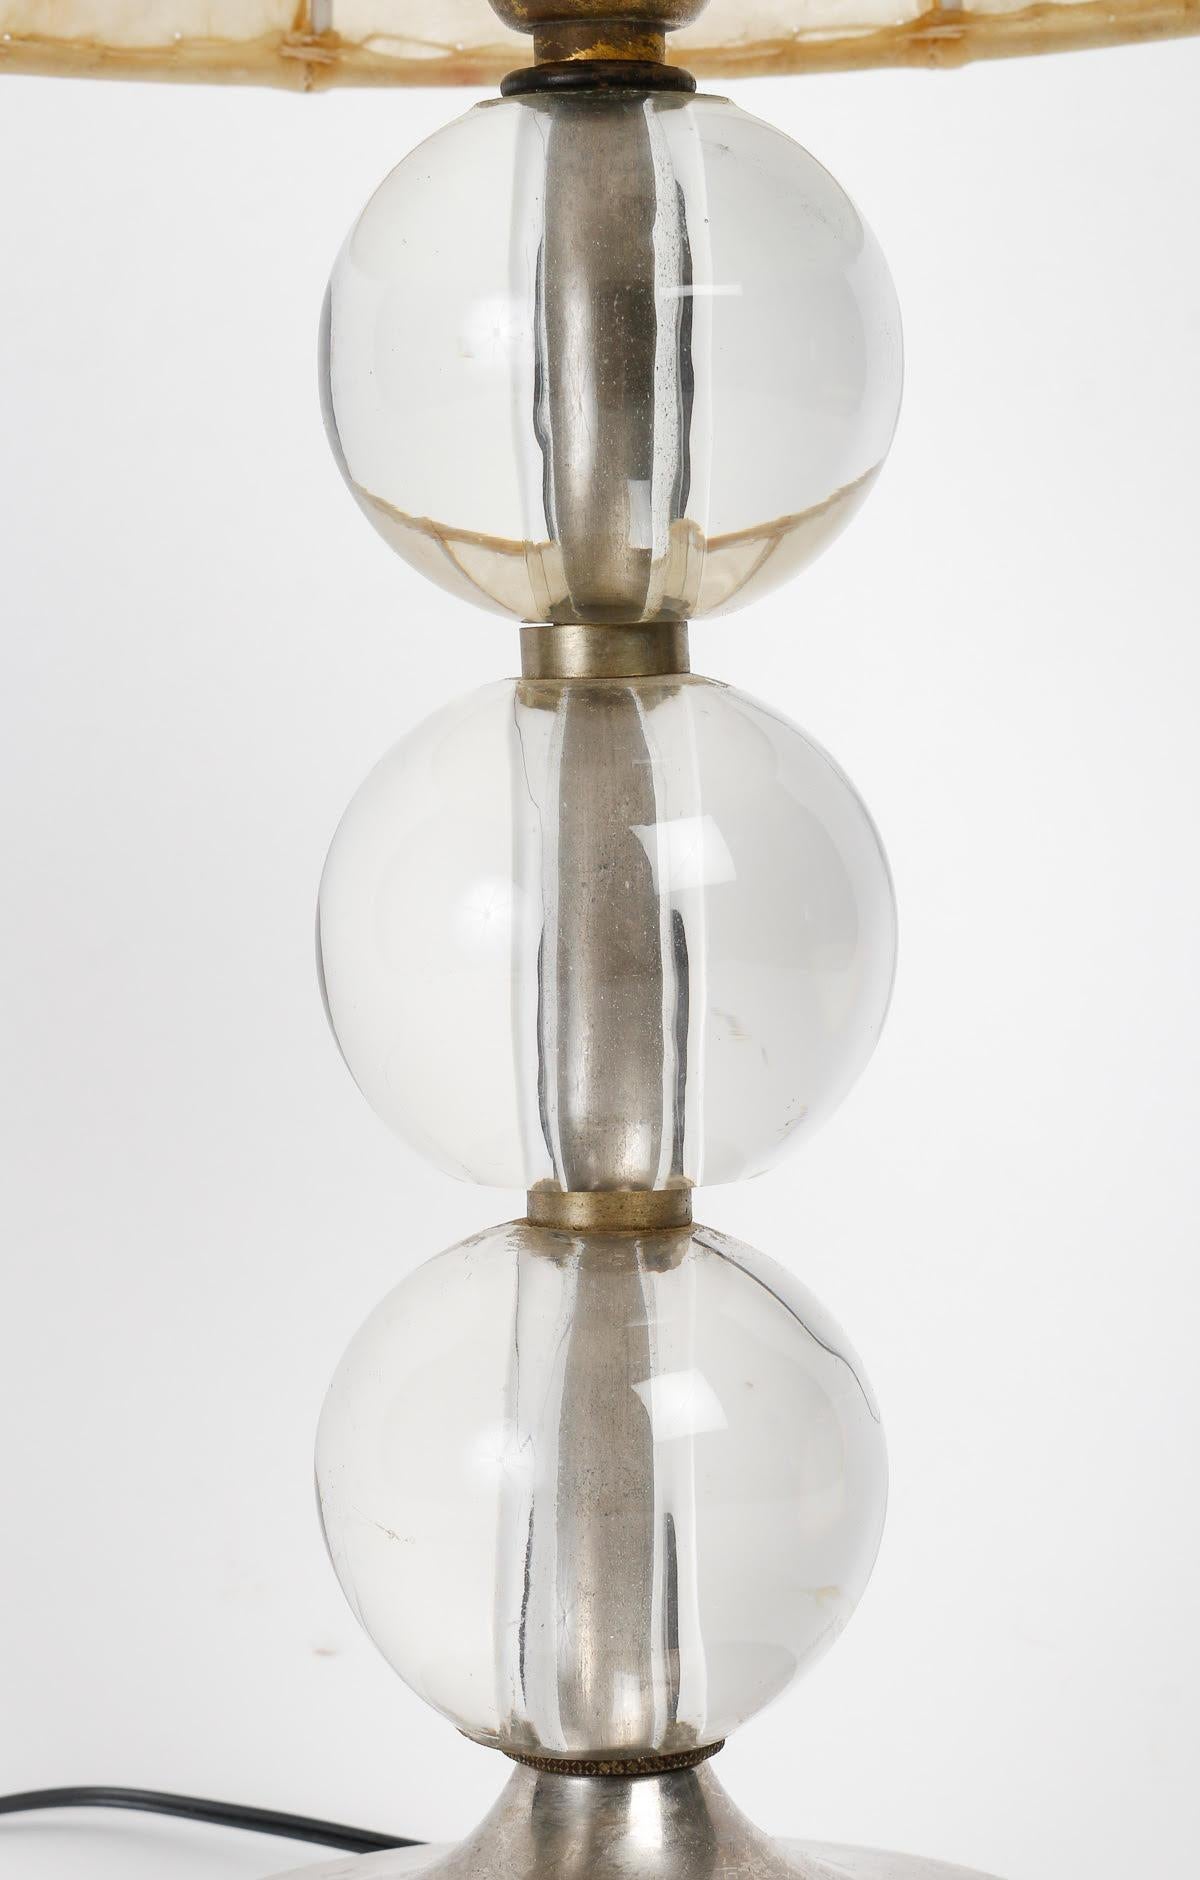 Table lamp by Adnet, circa 1930, Art Deco period.

Table lamp, 1930, Art Deco period by Adnet in crystal ball, nickel-plated bronze base and parchment shade.

H: 45cm, d: 23cm